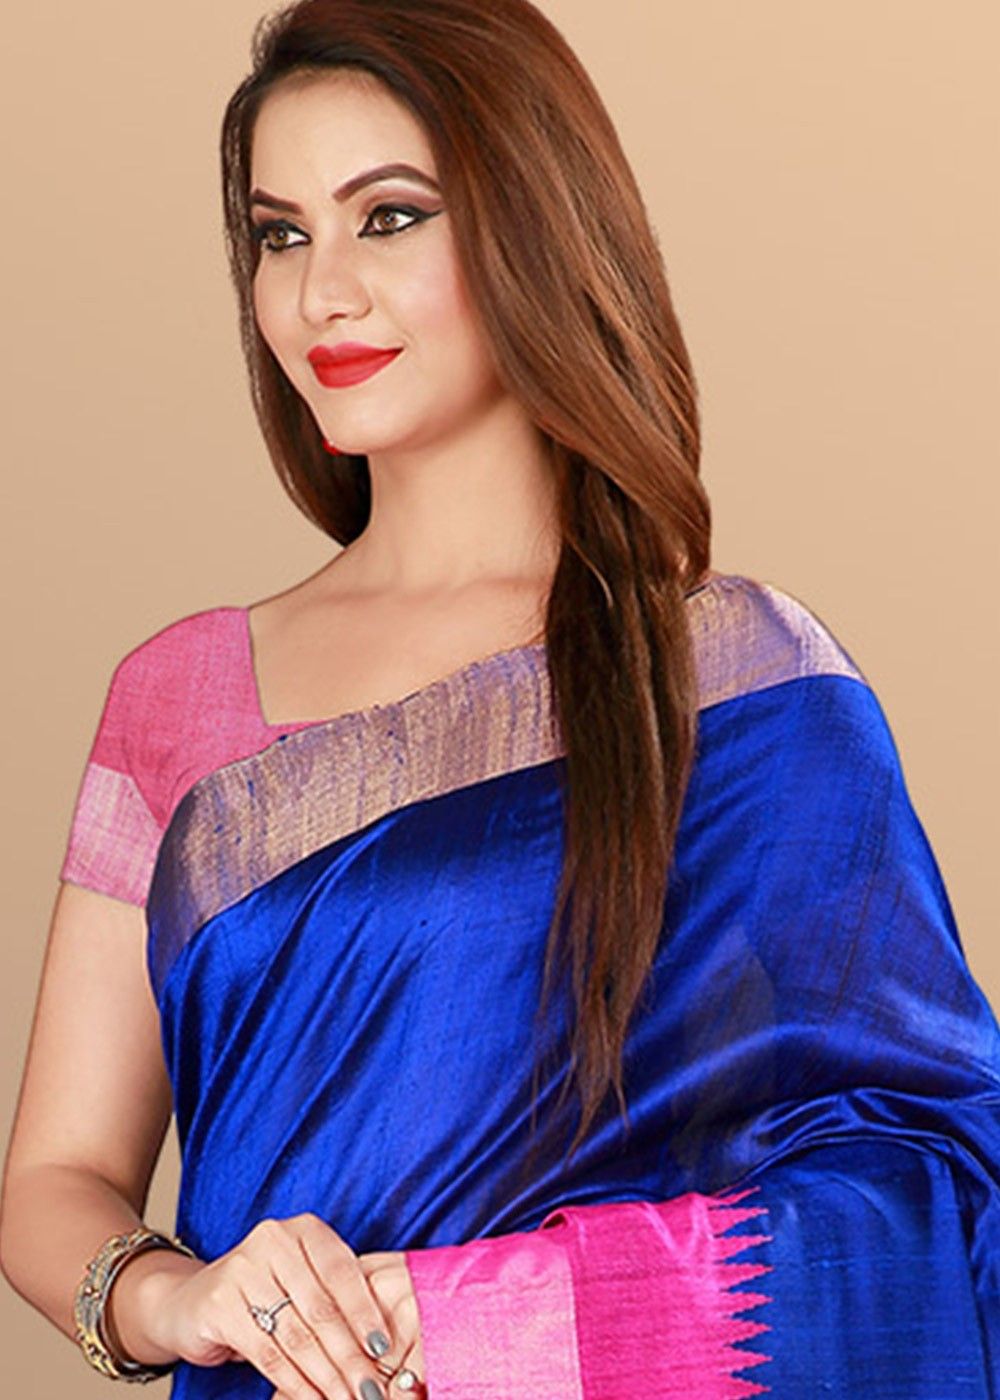 Blue and Pink Pure Silk Saree With Blouse Latest 2825SR09